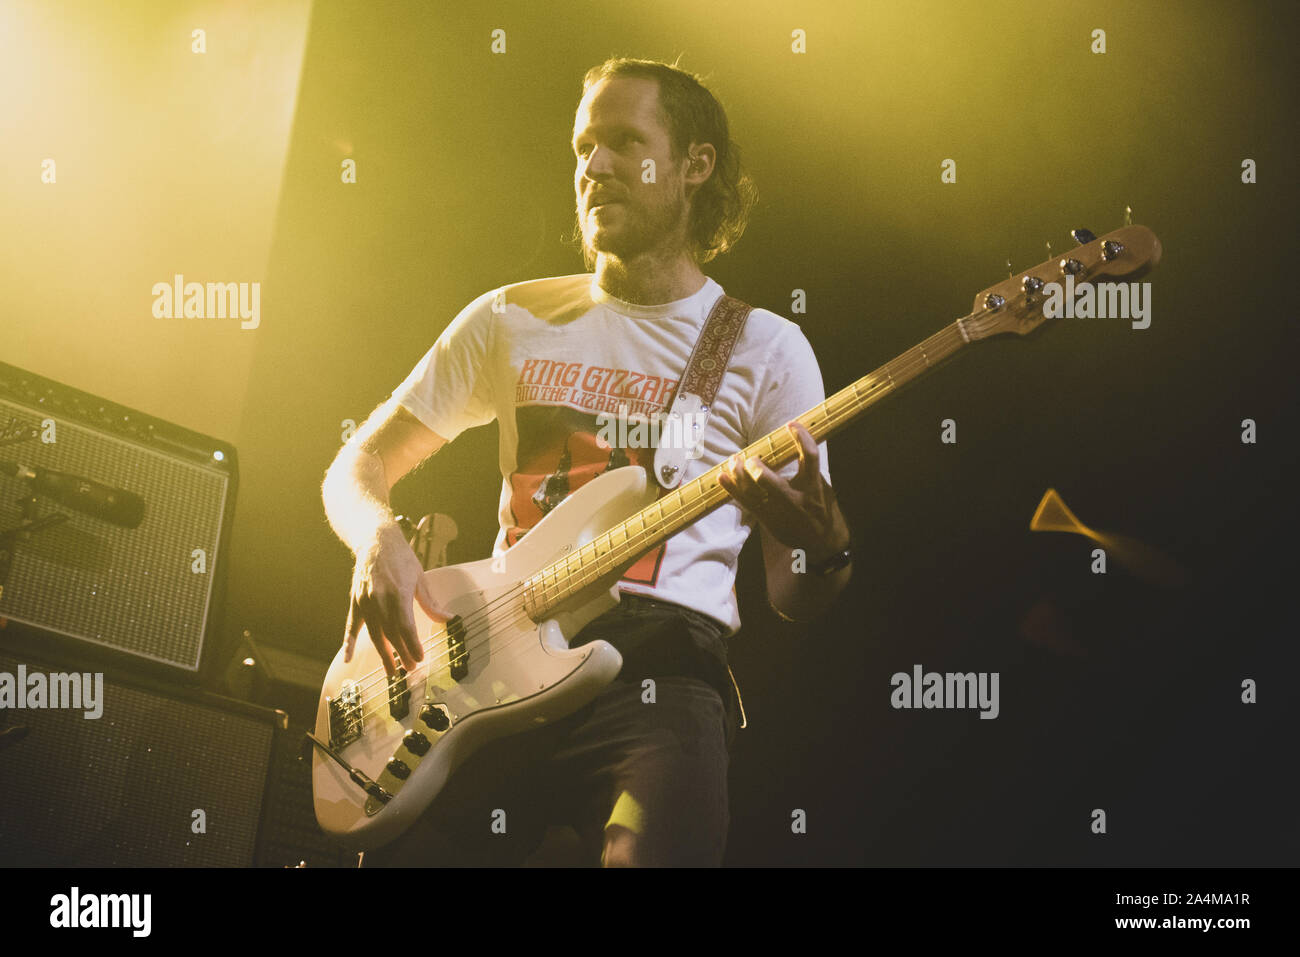 FABRIQUE, MILANO, ITALY - 2019/10/14: Nick Jost of the american band Baroness performing live on stage at Fabrique, opening for Volbeat Stock Photo